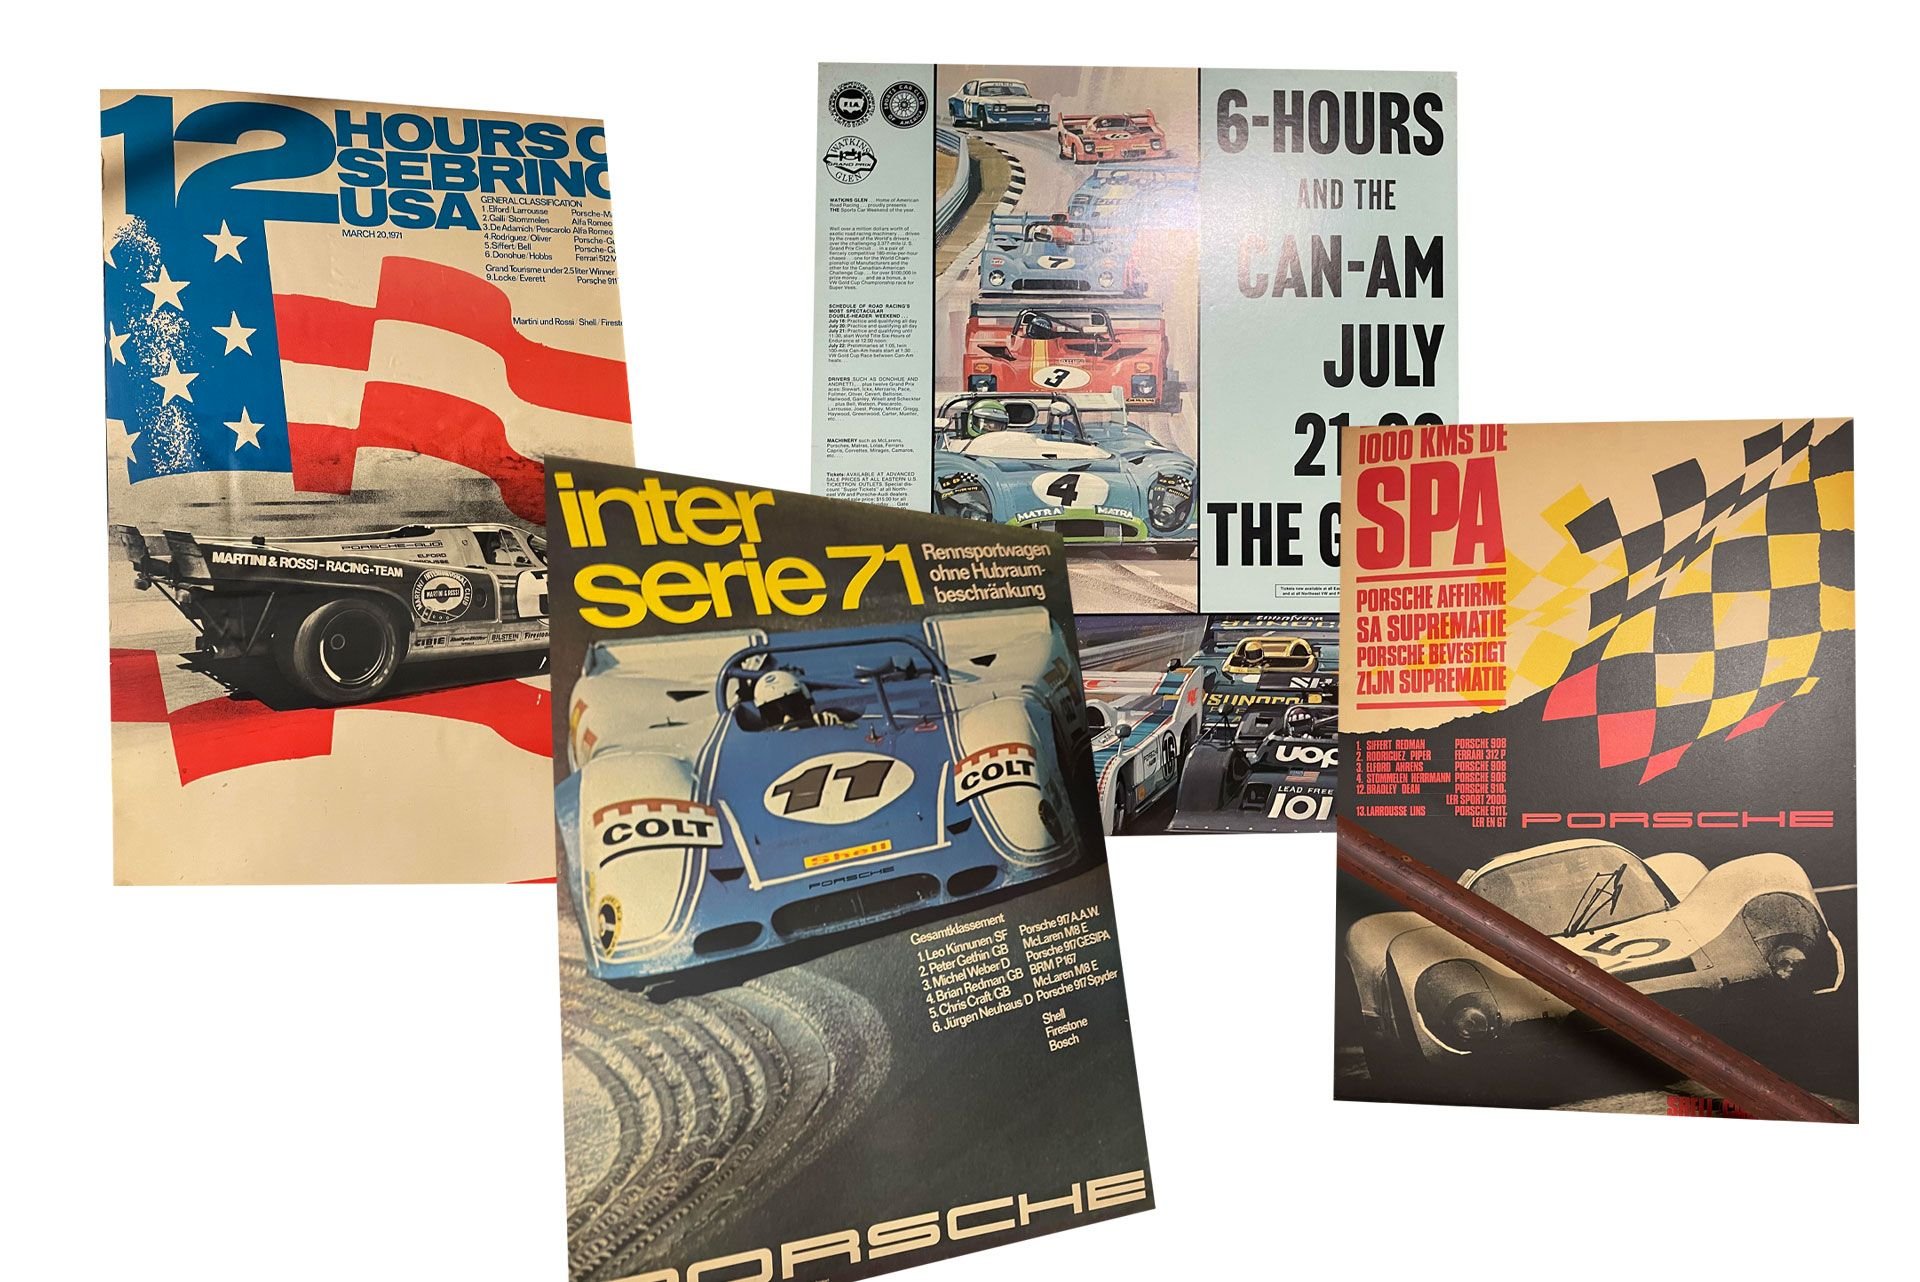 For Sale Group of Porsche Le Mans Posters, mostly mounted on posterboard